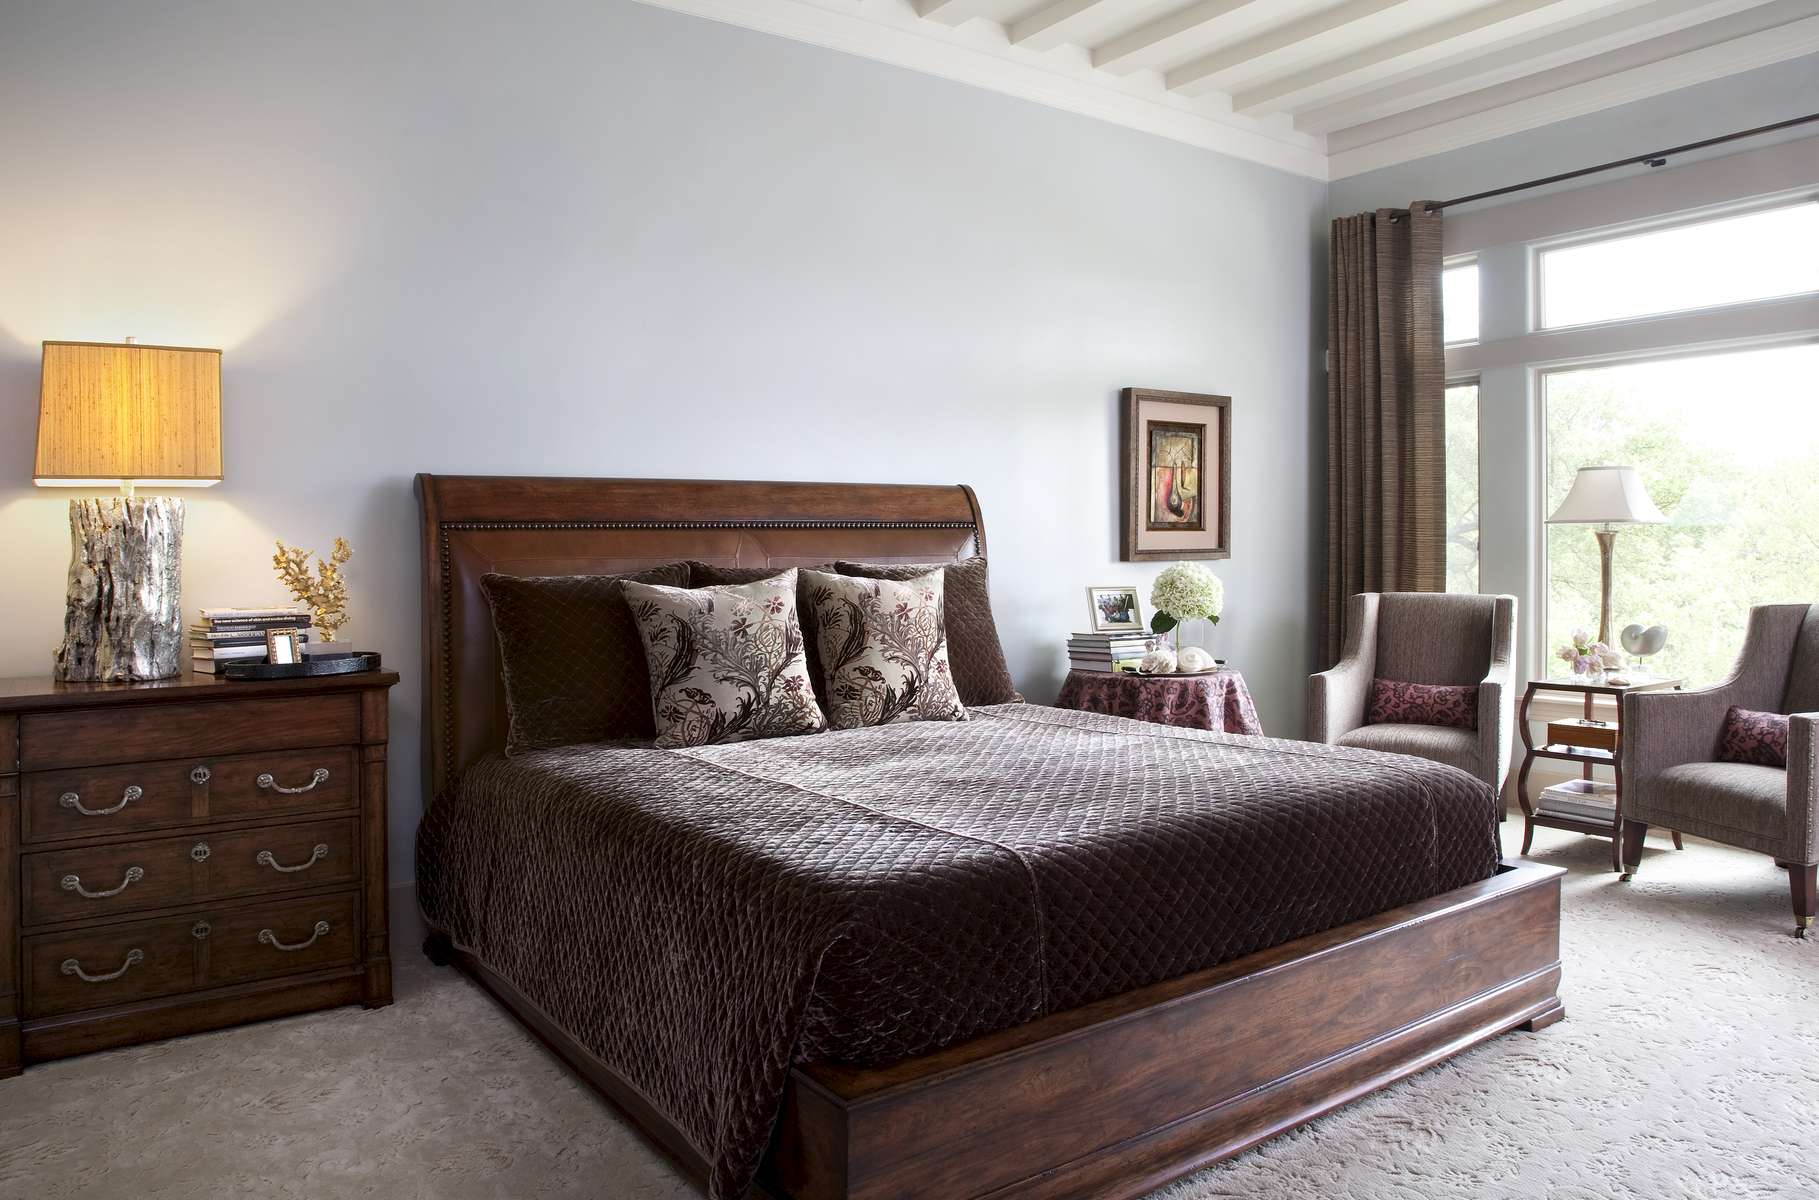 The ceiling beams were added to bring the comfort of Tuscany to the bedroom.